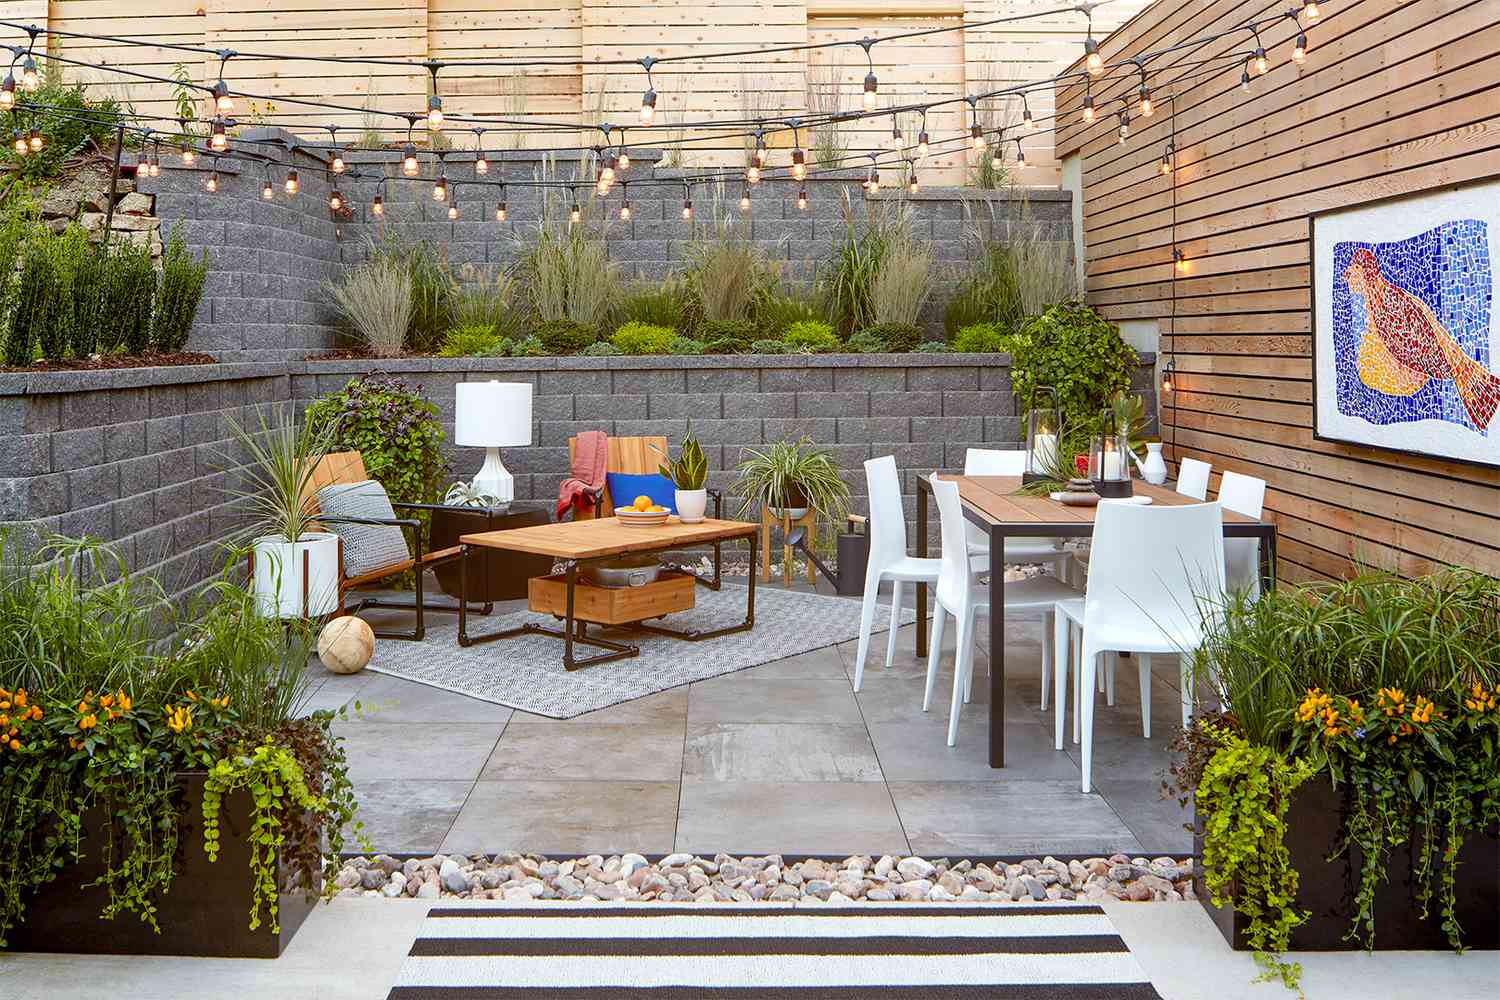 Outdoor String Lights In Your Backyard, How To Hang Lights On Concrete Walls